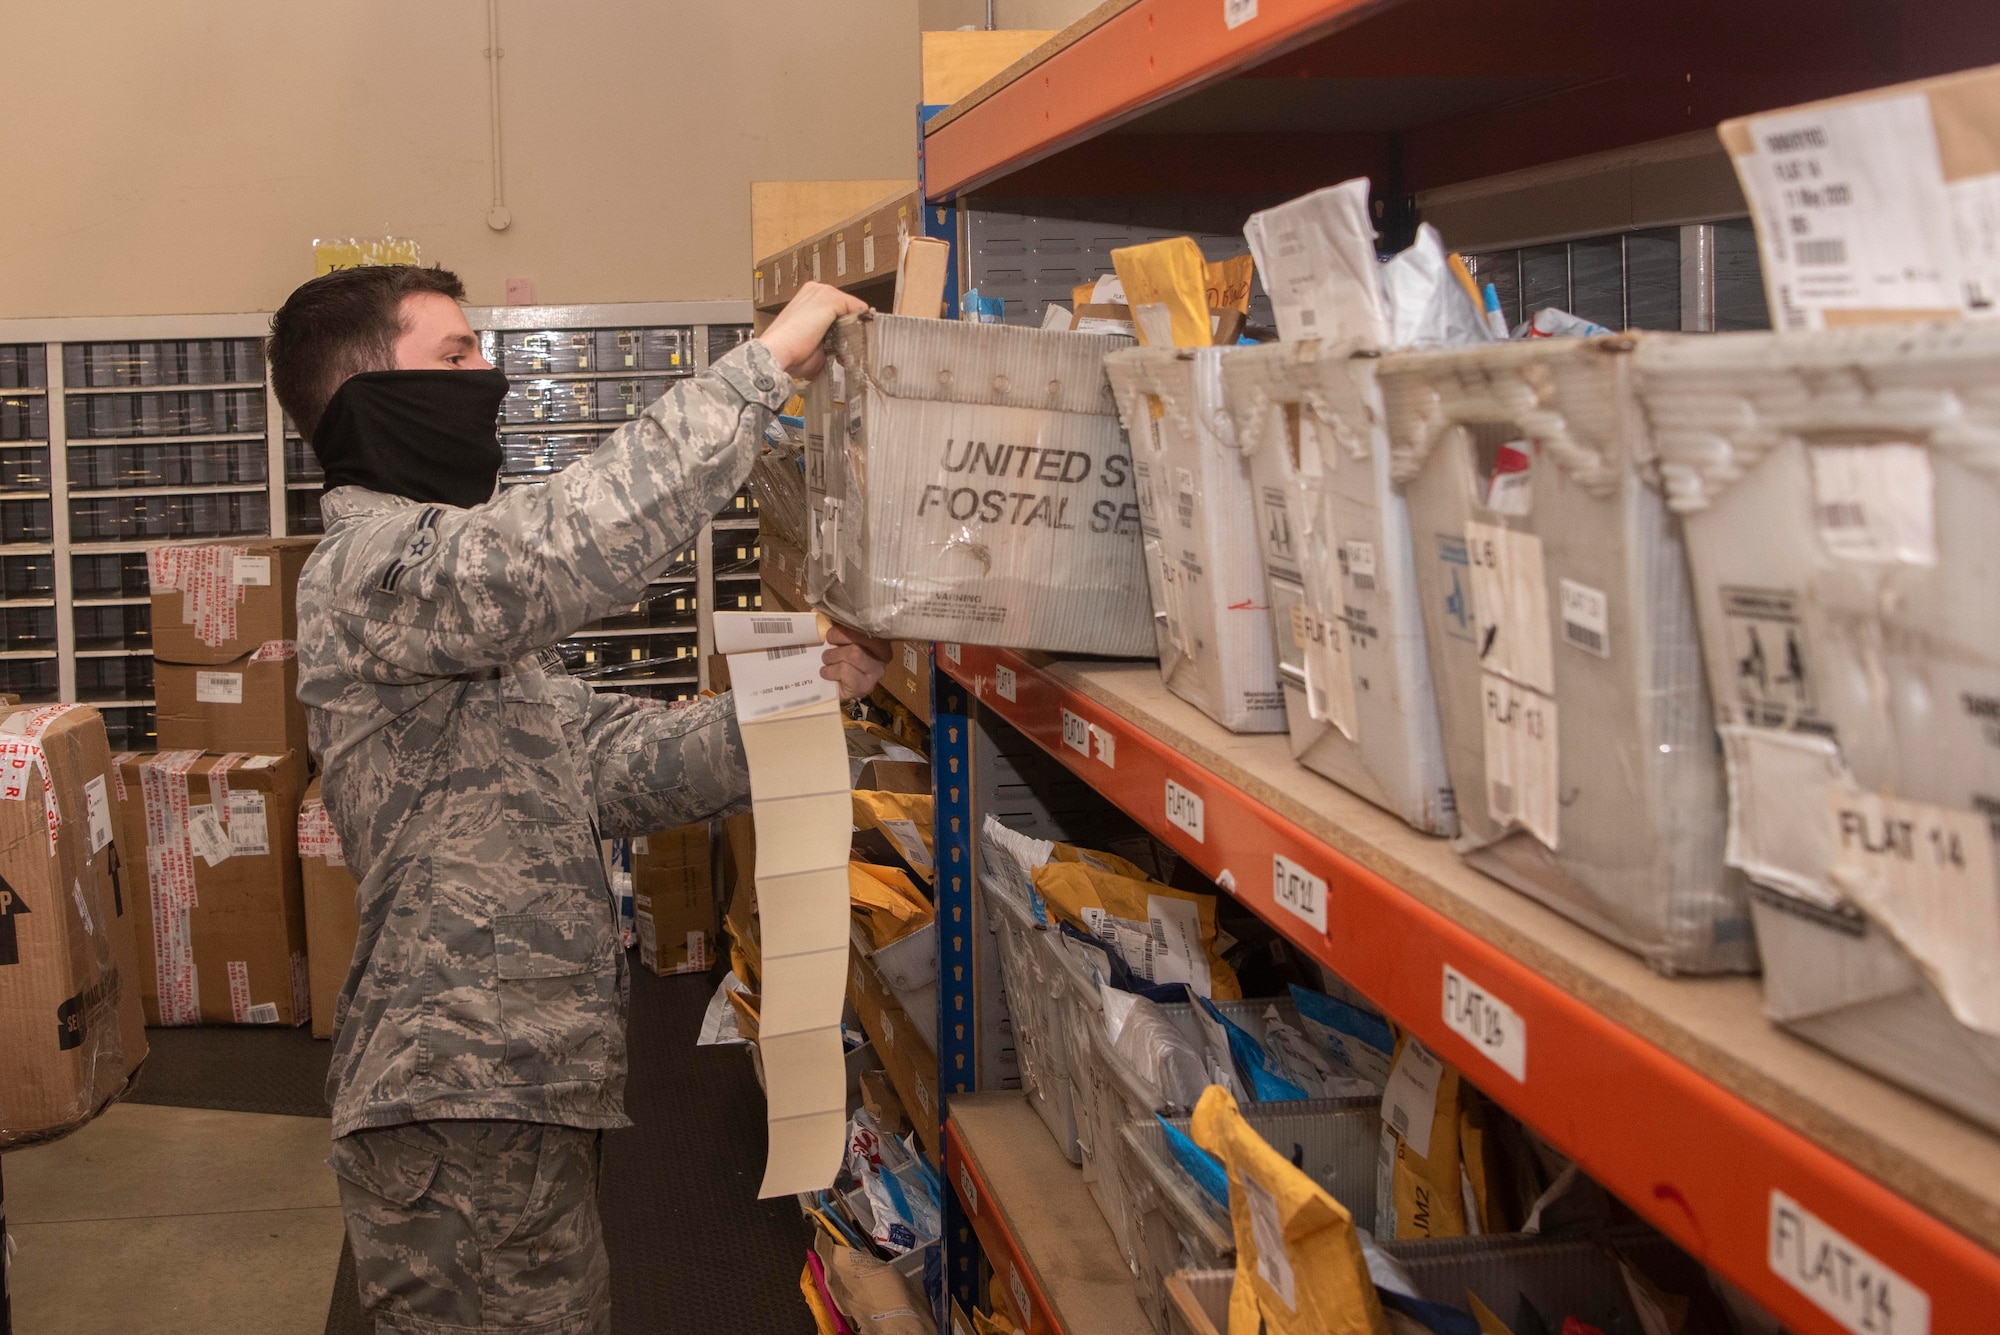 Airman 1st Class Austin Wells, 100th Force Support Squadron military postal clerk, shelves a basket of mail inside the post office at RAF Mildenhall, England, May 19, 2020. The post office has extended holding times for packages due to COVID-19. (U.S. Air Force photo by Airman 1st Class Joseph Barron) (Portions of this photo have been blurred for privacy purposes)